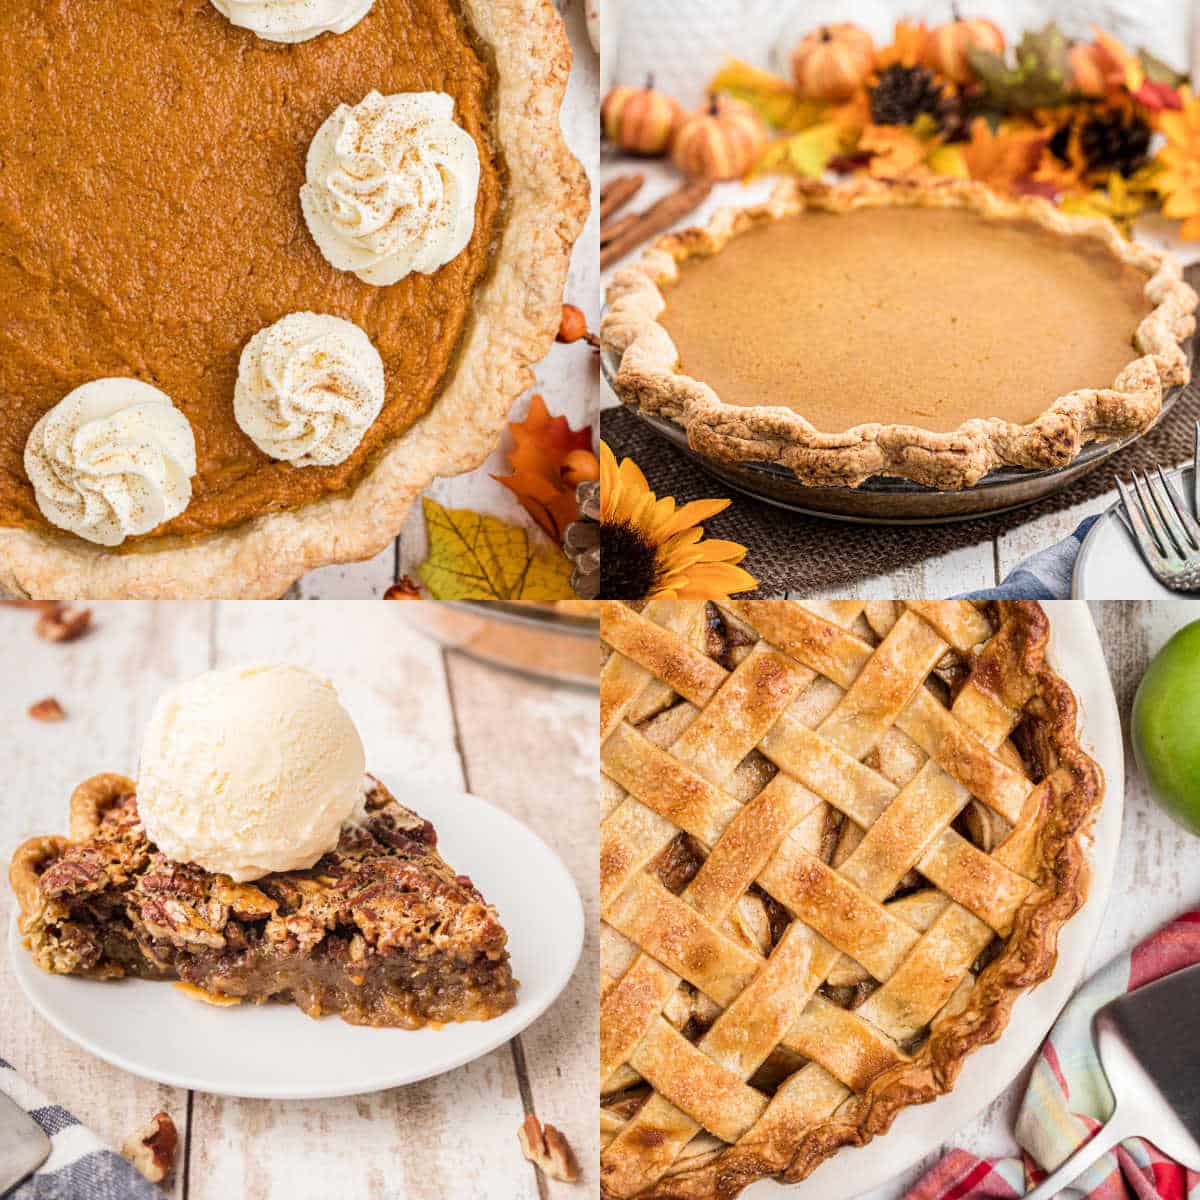 A collage of four images showing some great old fashioned pies, like pumpkin pie, for Thanksgiving desserts.